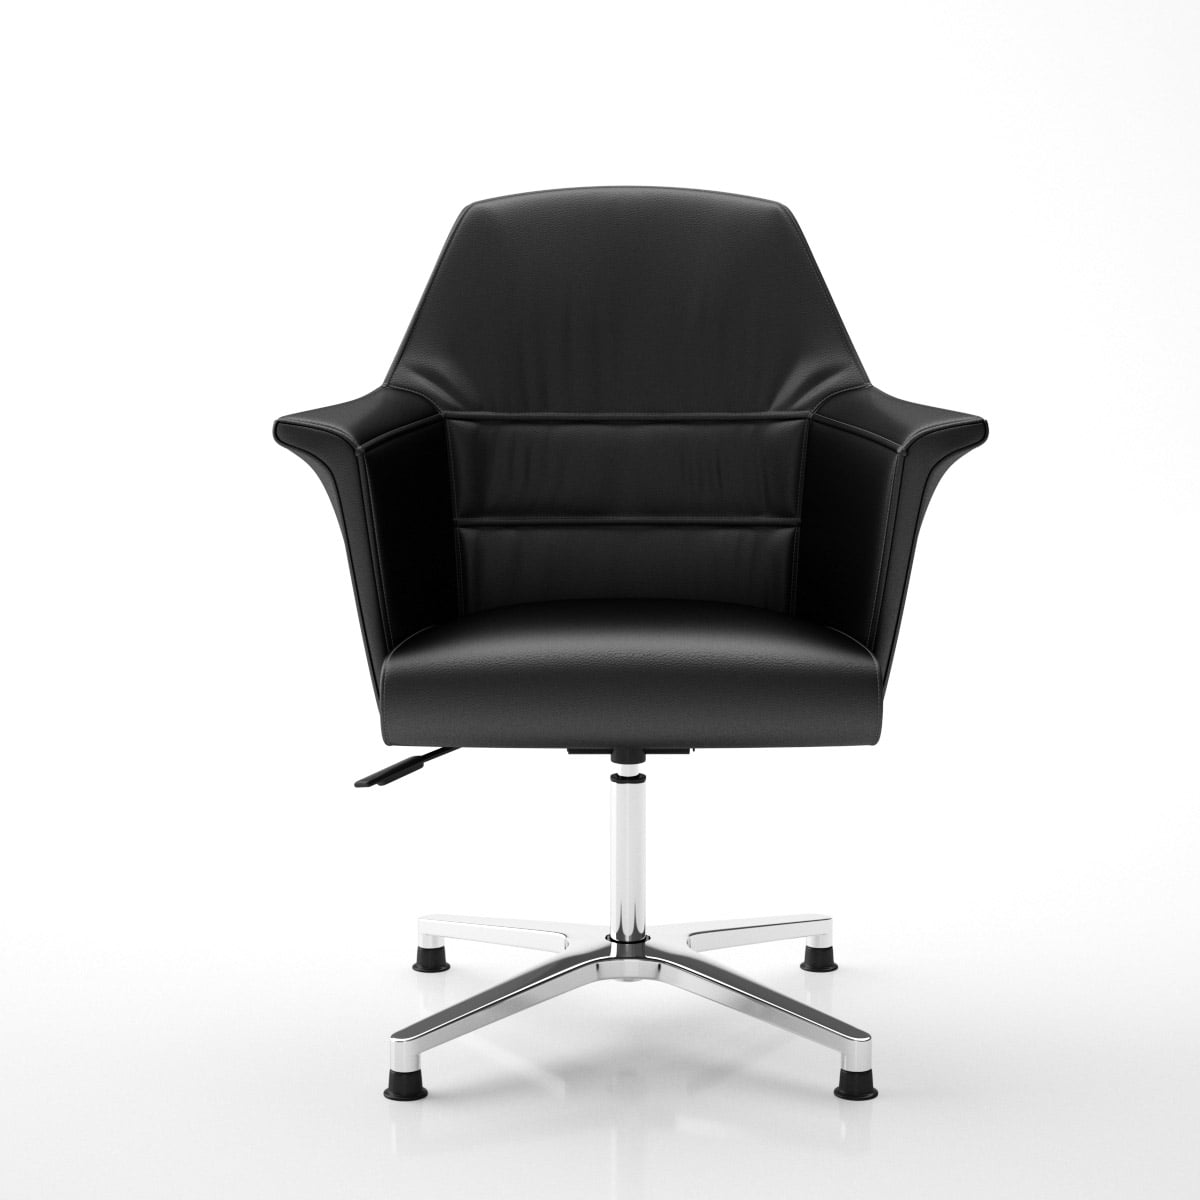 A luxury meeting room office chair in black leather